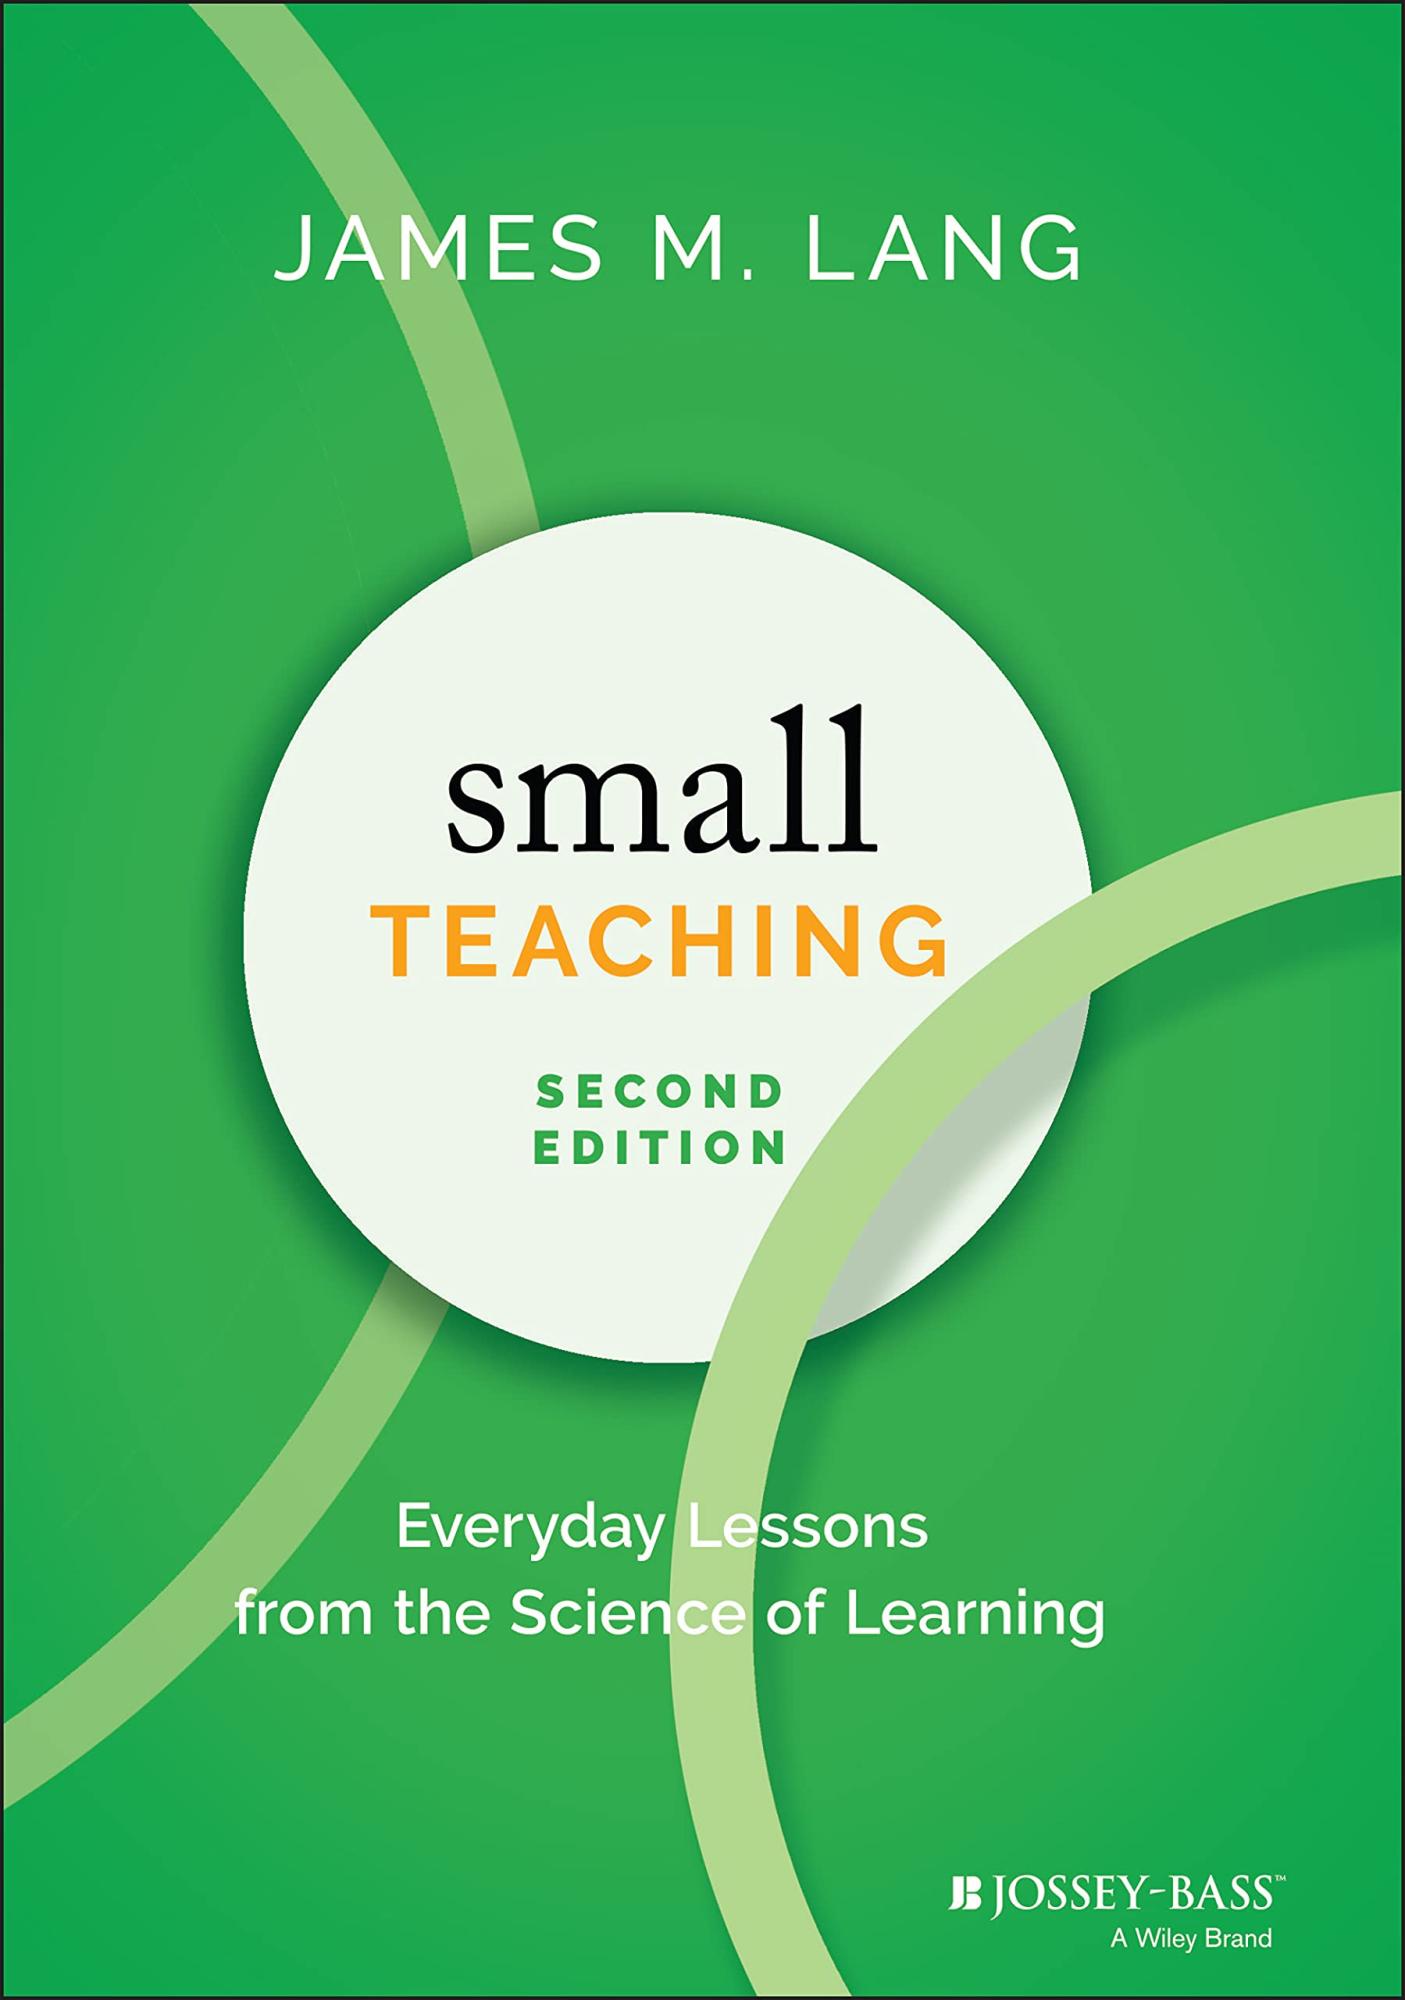 Small Teaching book cover